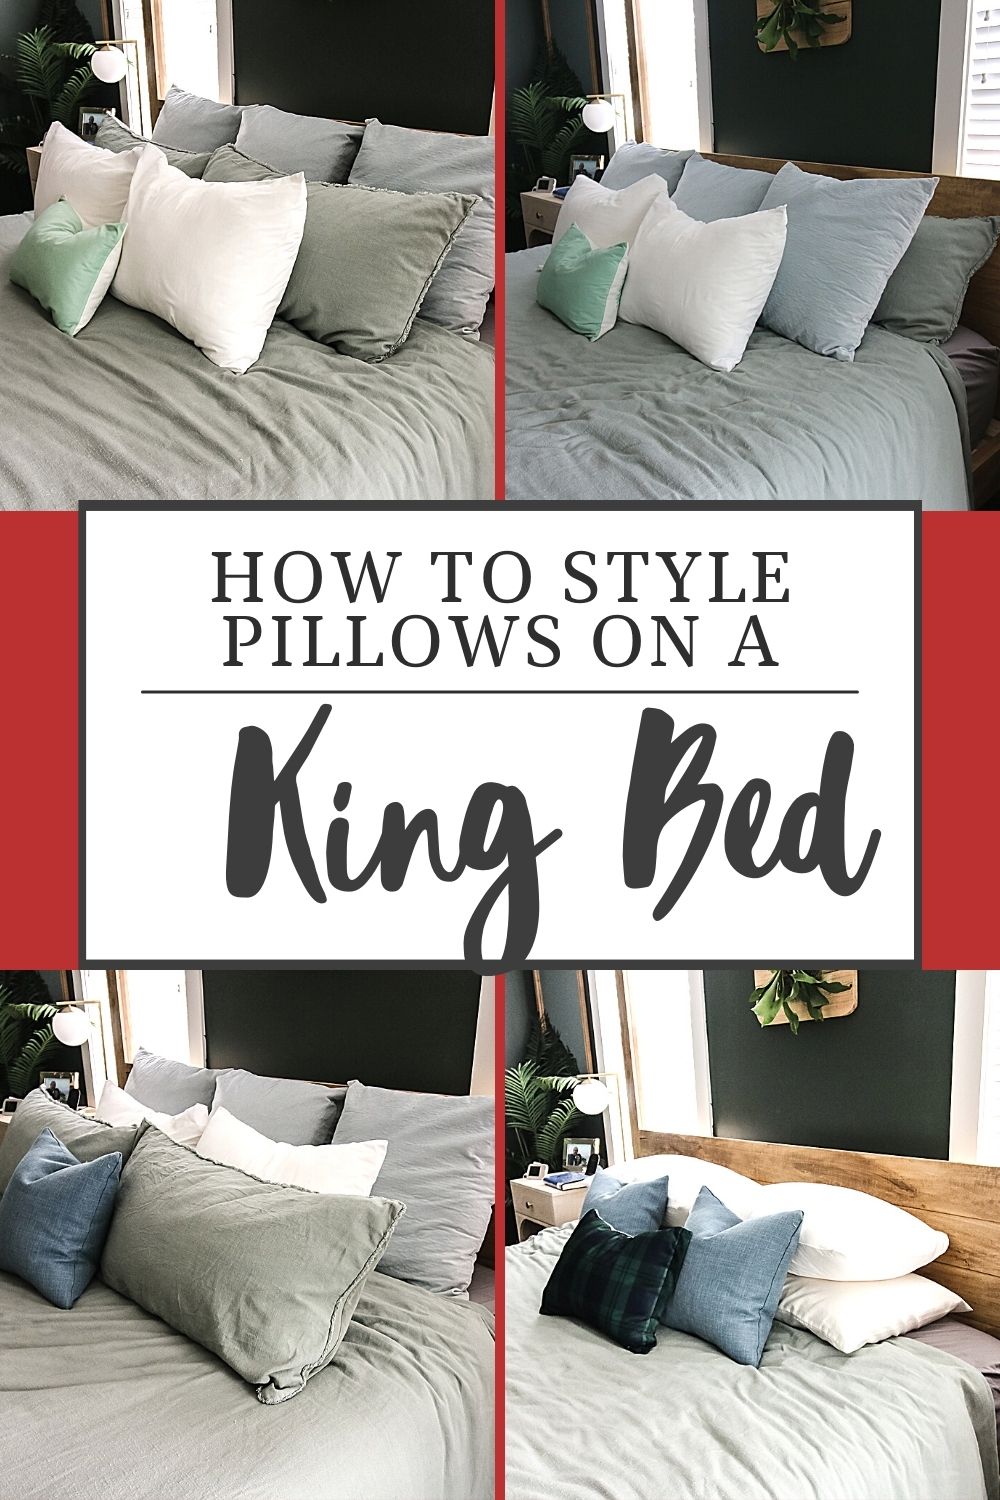 How To Arrange Pillows On A King Size Bed 4 Simple king bed pillow arrangement ideas